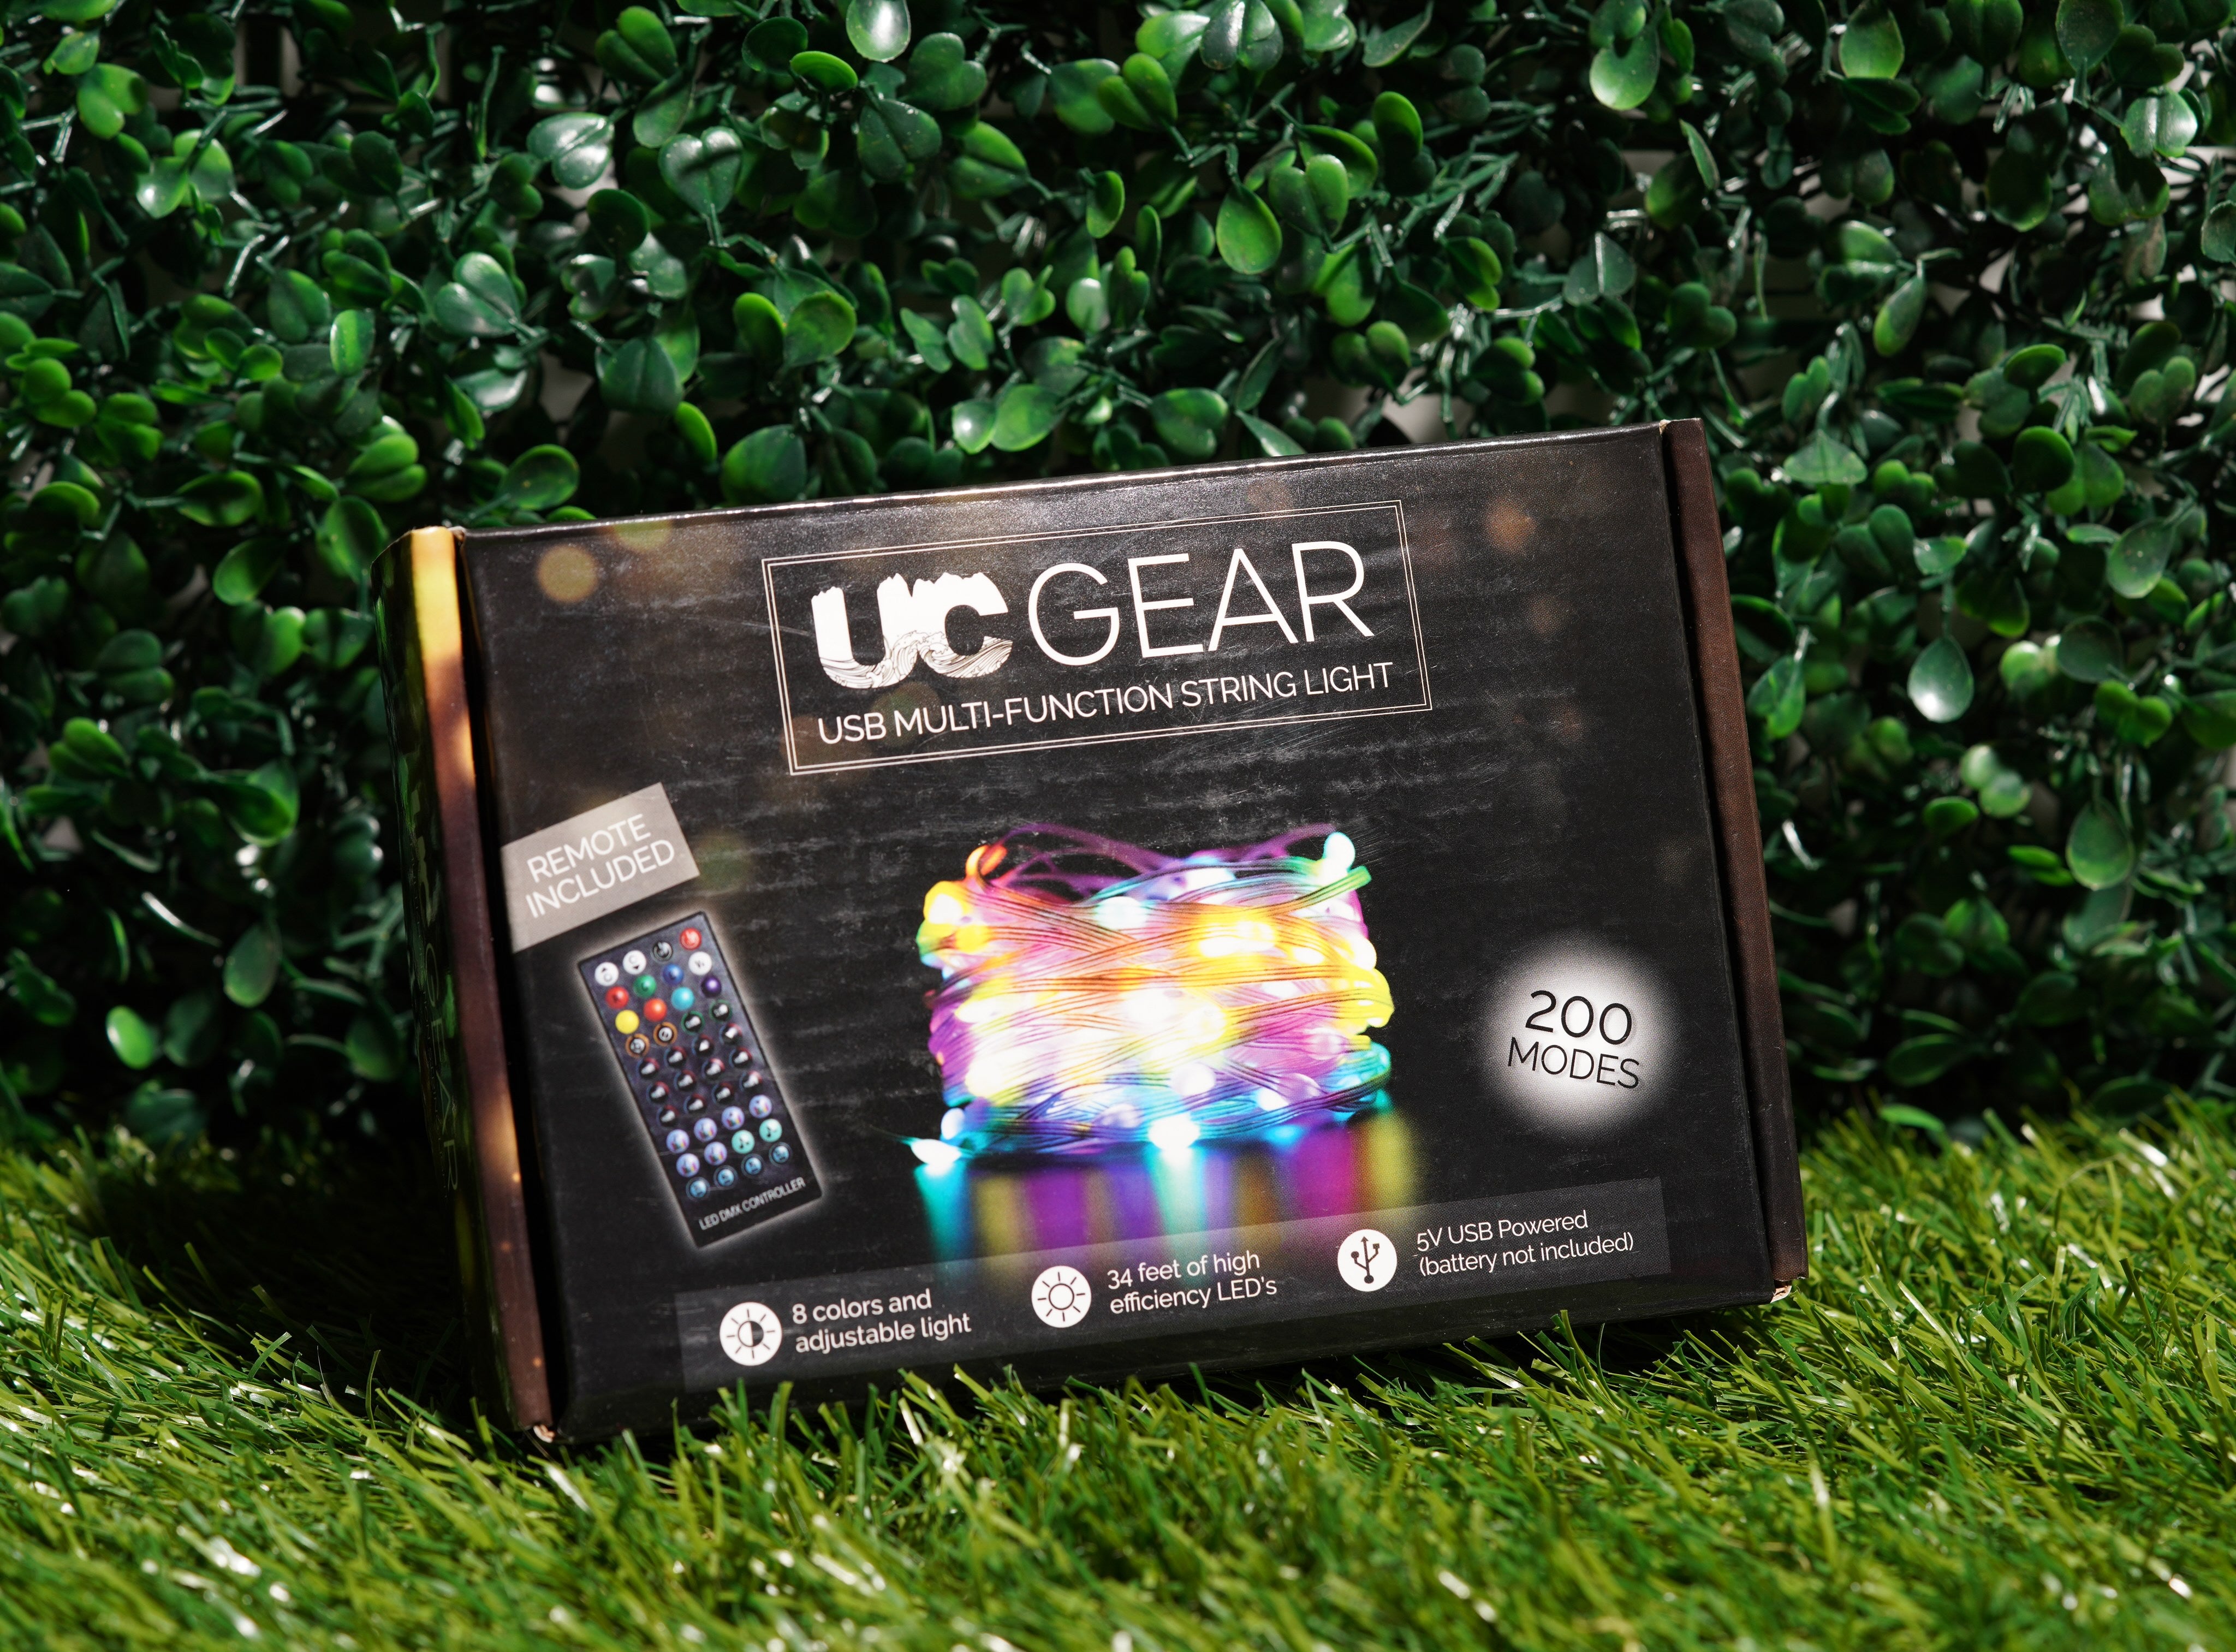 UC Gear USB Multi-Function String Light with Remote